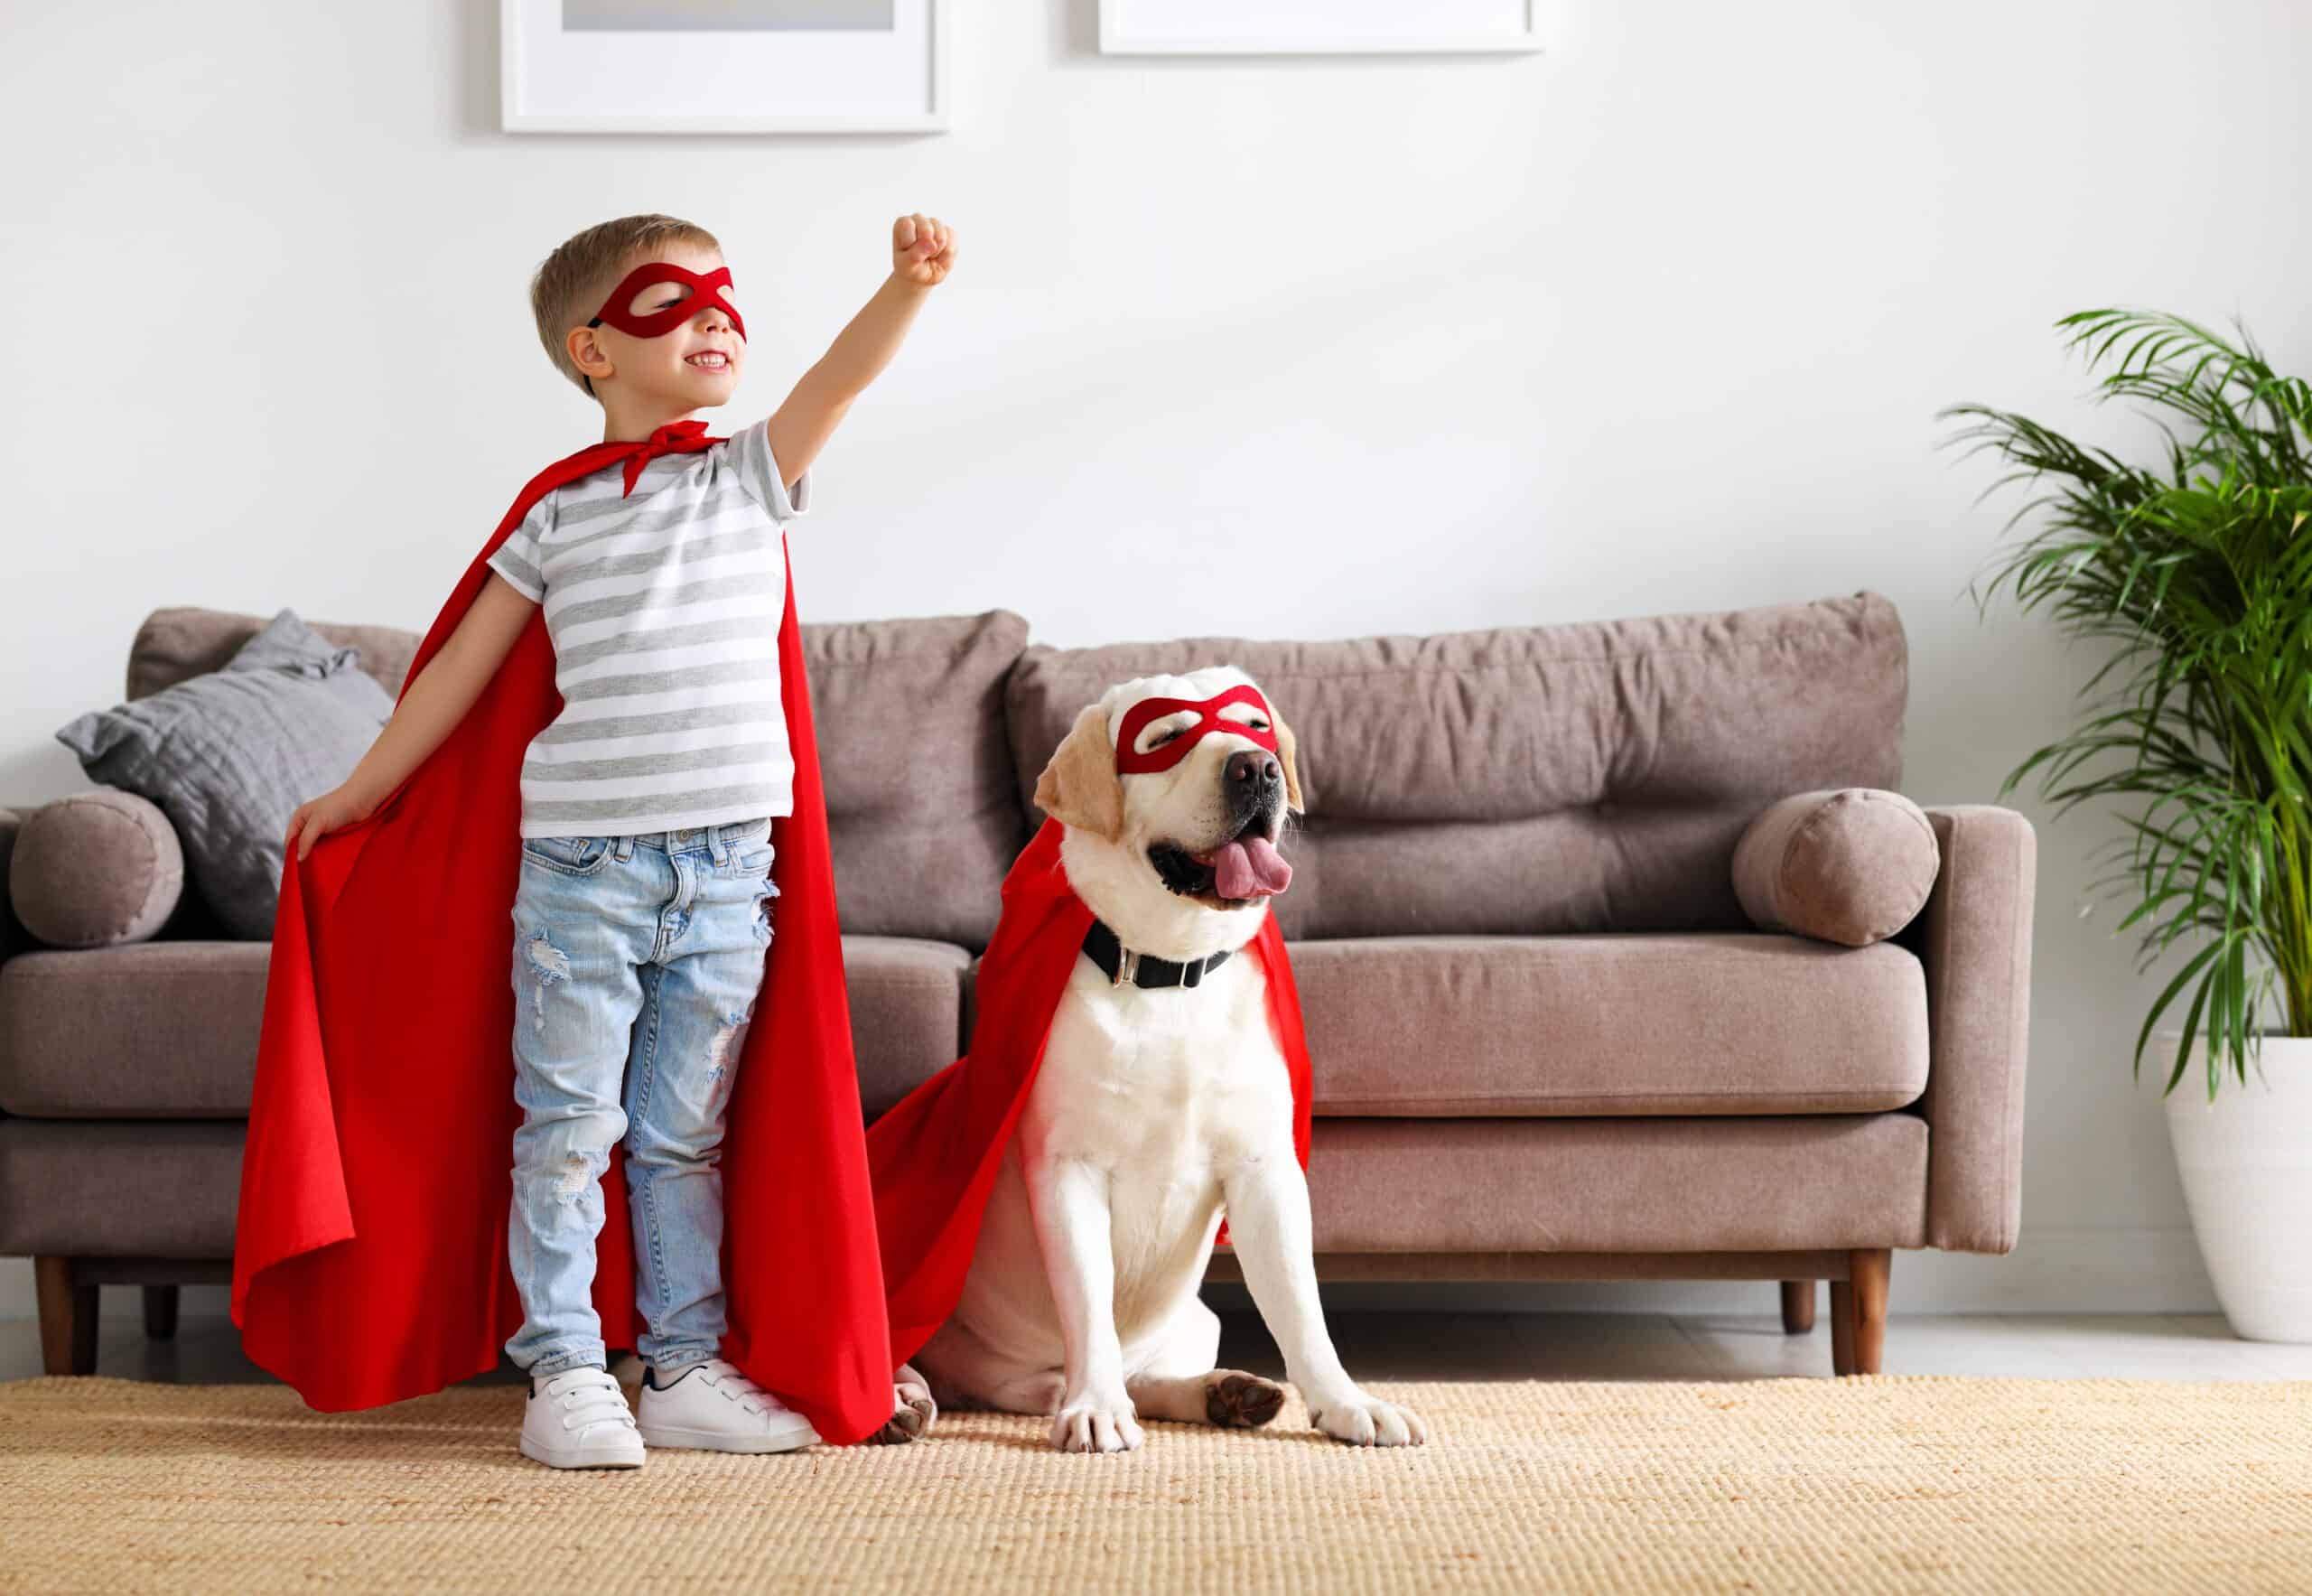 A full body of little boy in a red superhero cloak and mask raises his hand while playing with a funny dog dressed in a similar costume in the living room at home.